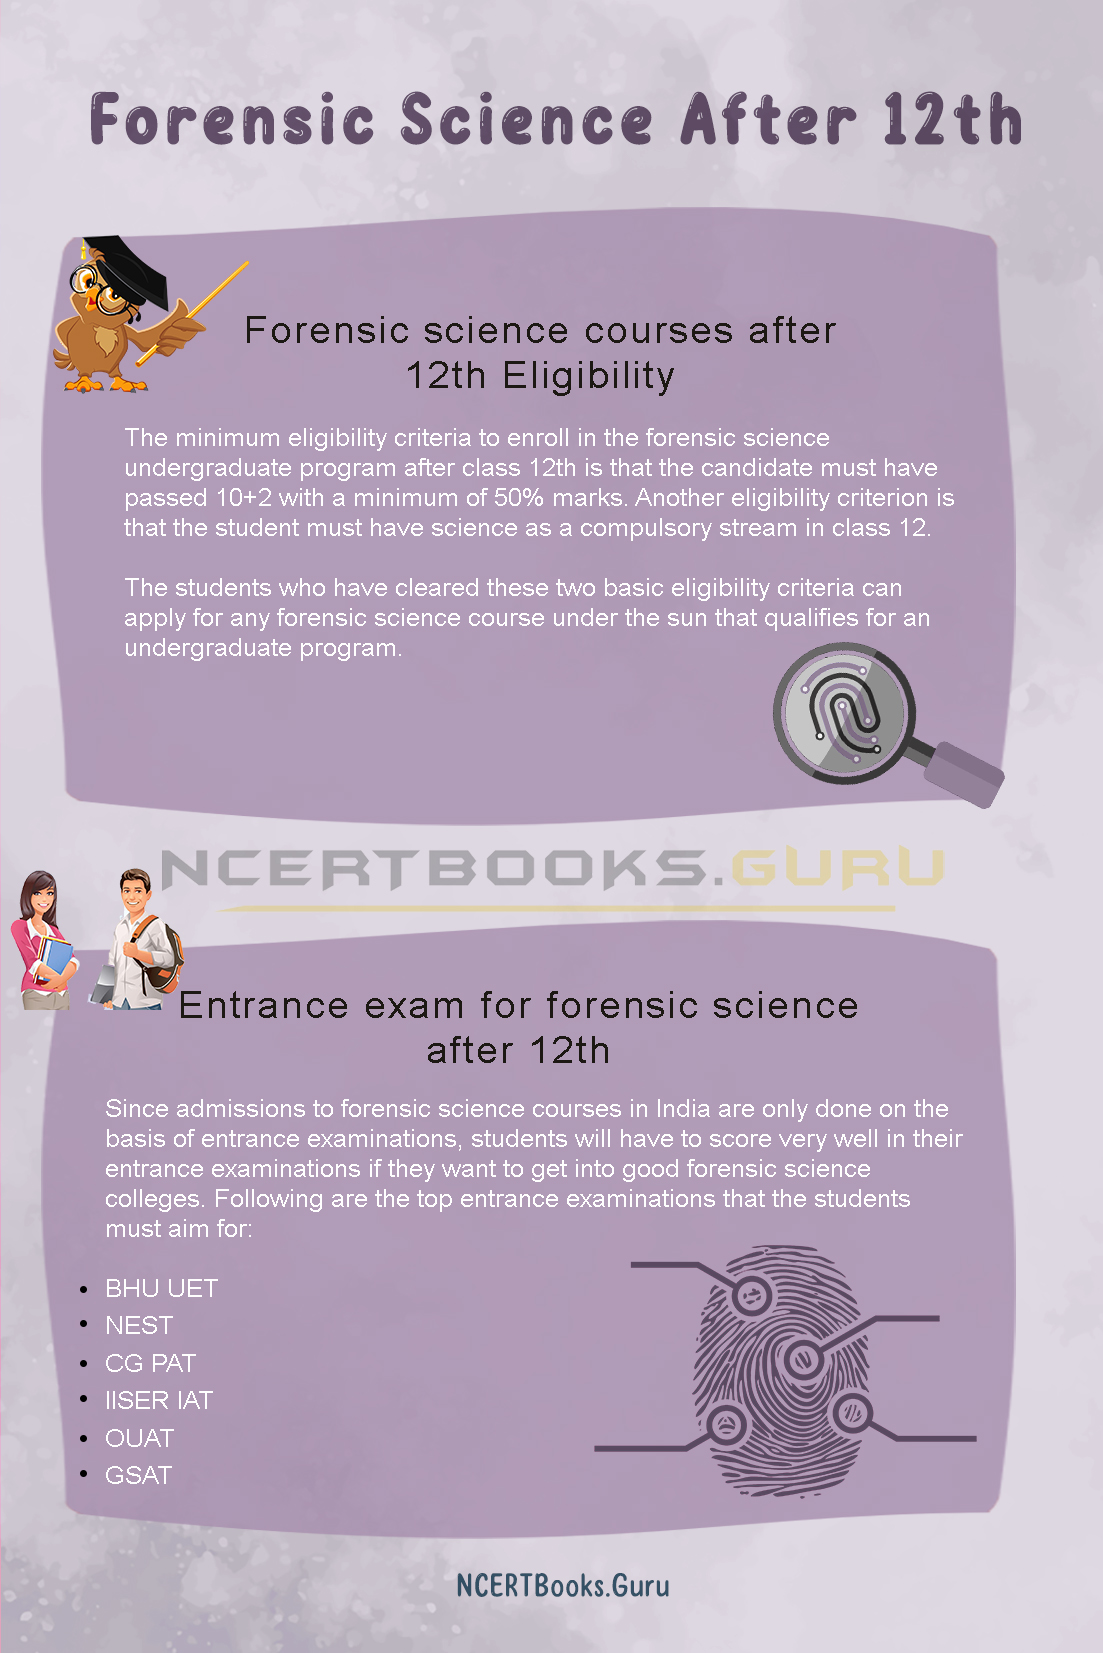 How to Study Forensic Science After 12th 2